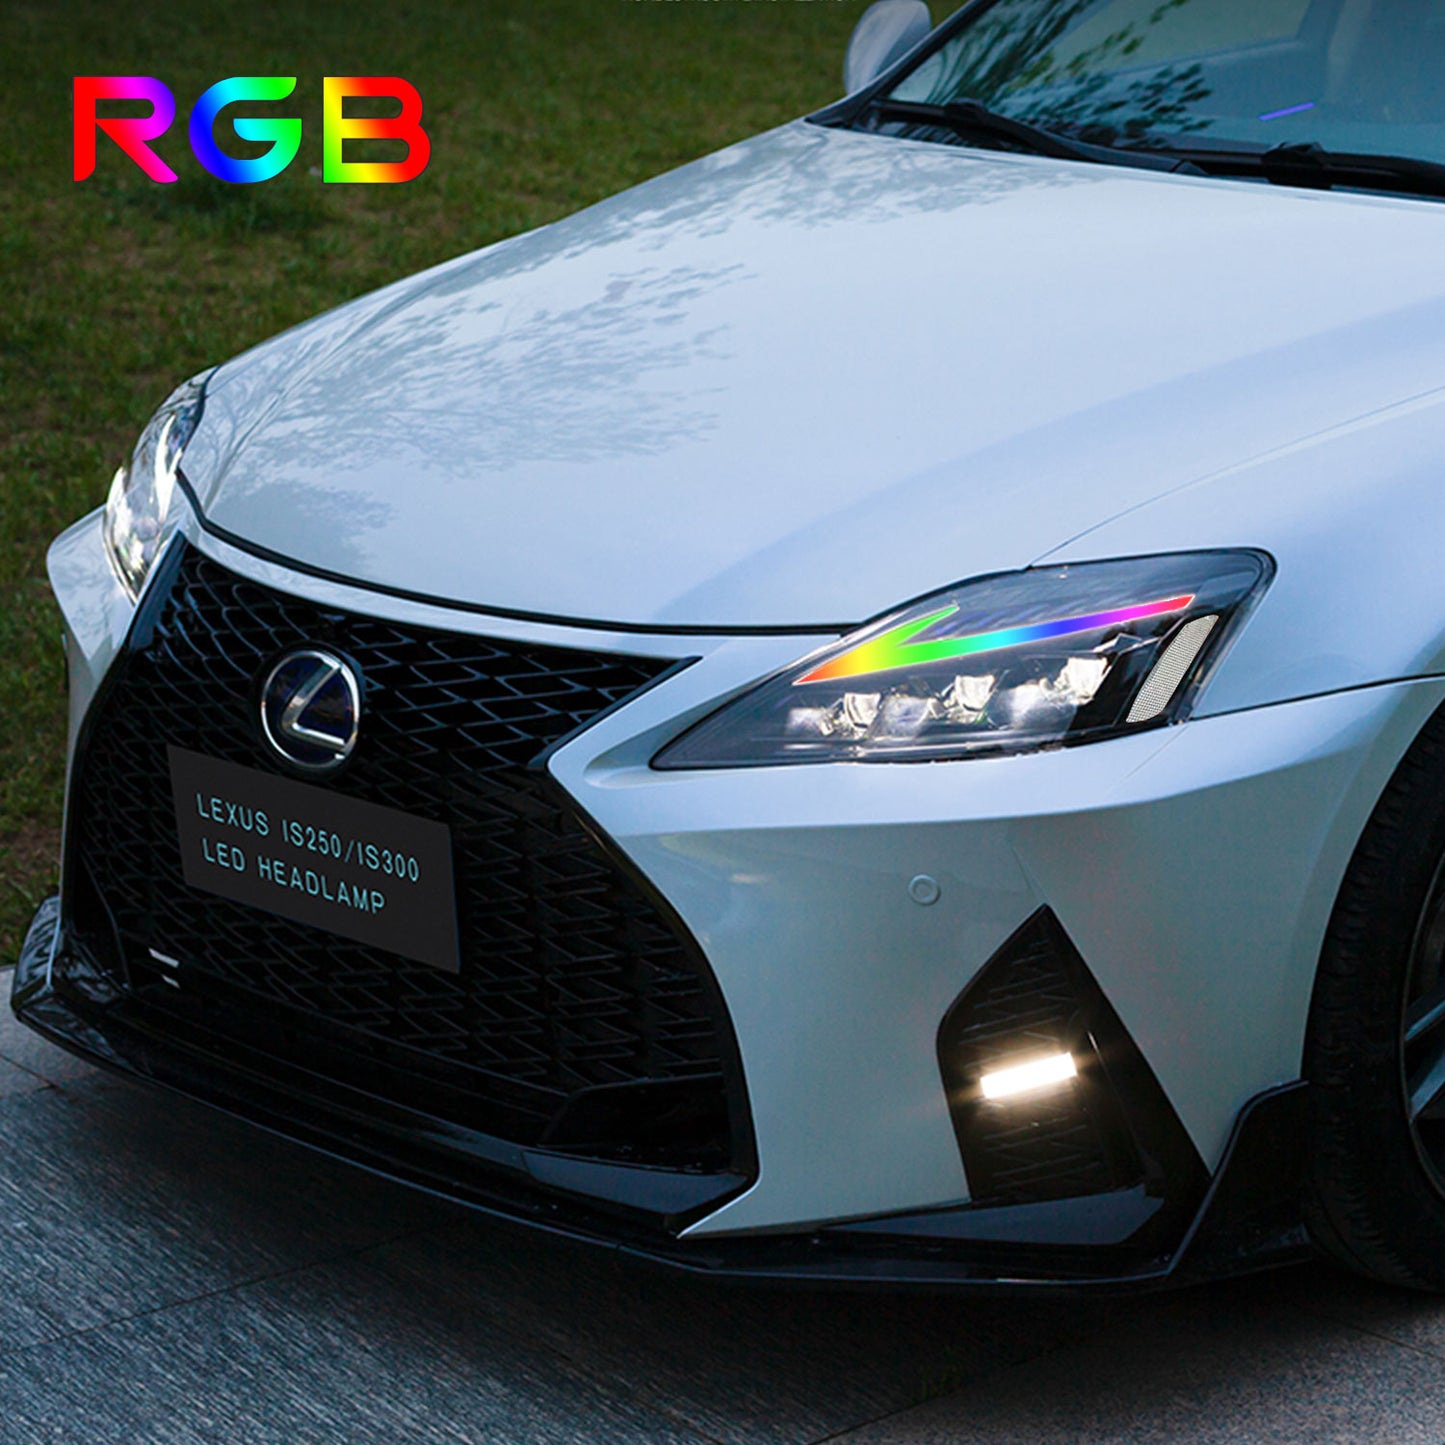 HCMOTION RGB LED Head Light For Lexus IS250 IS350 ISF 2006-2013 Intelligent Control Colorful Headlights